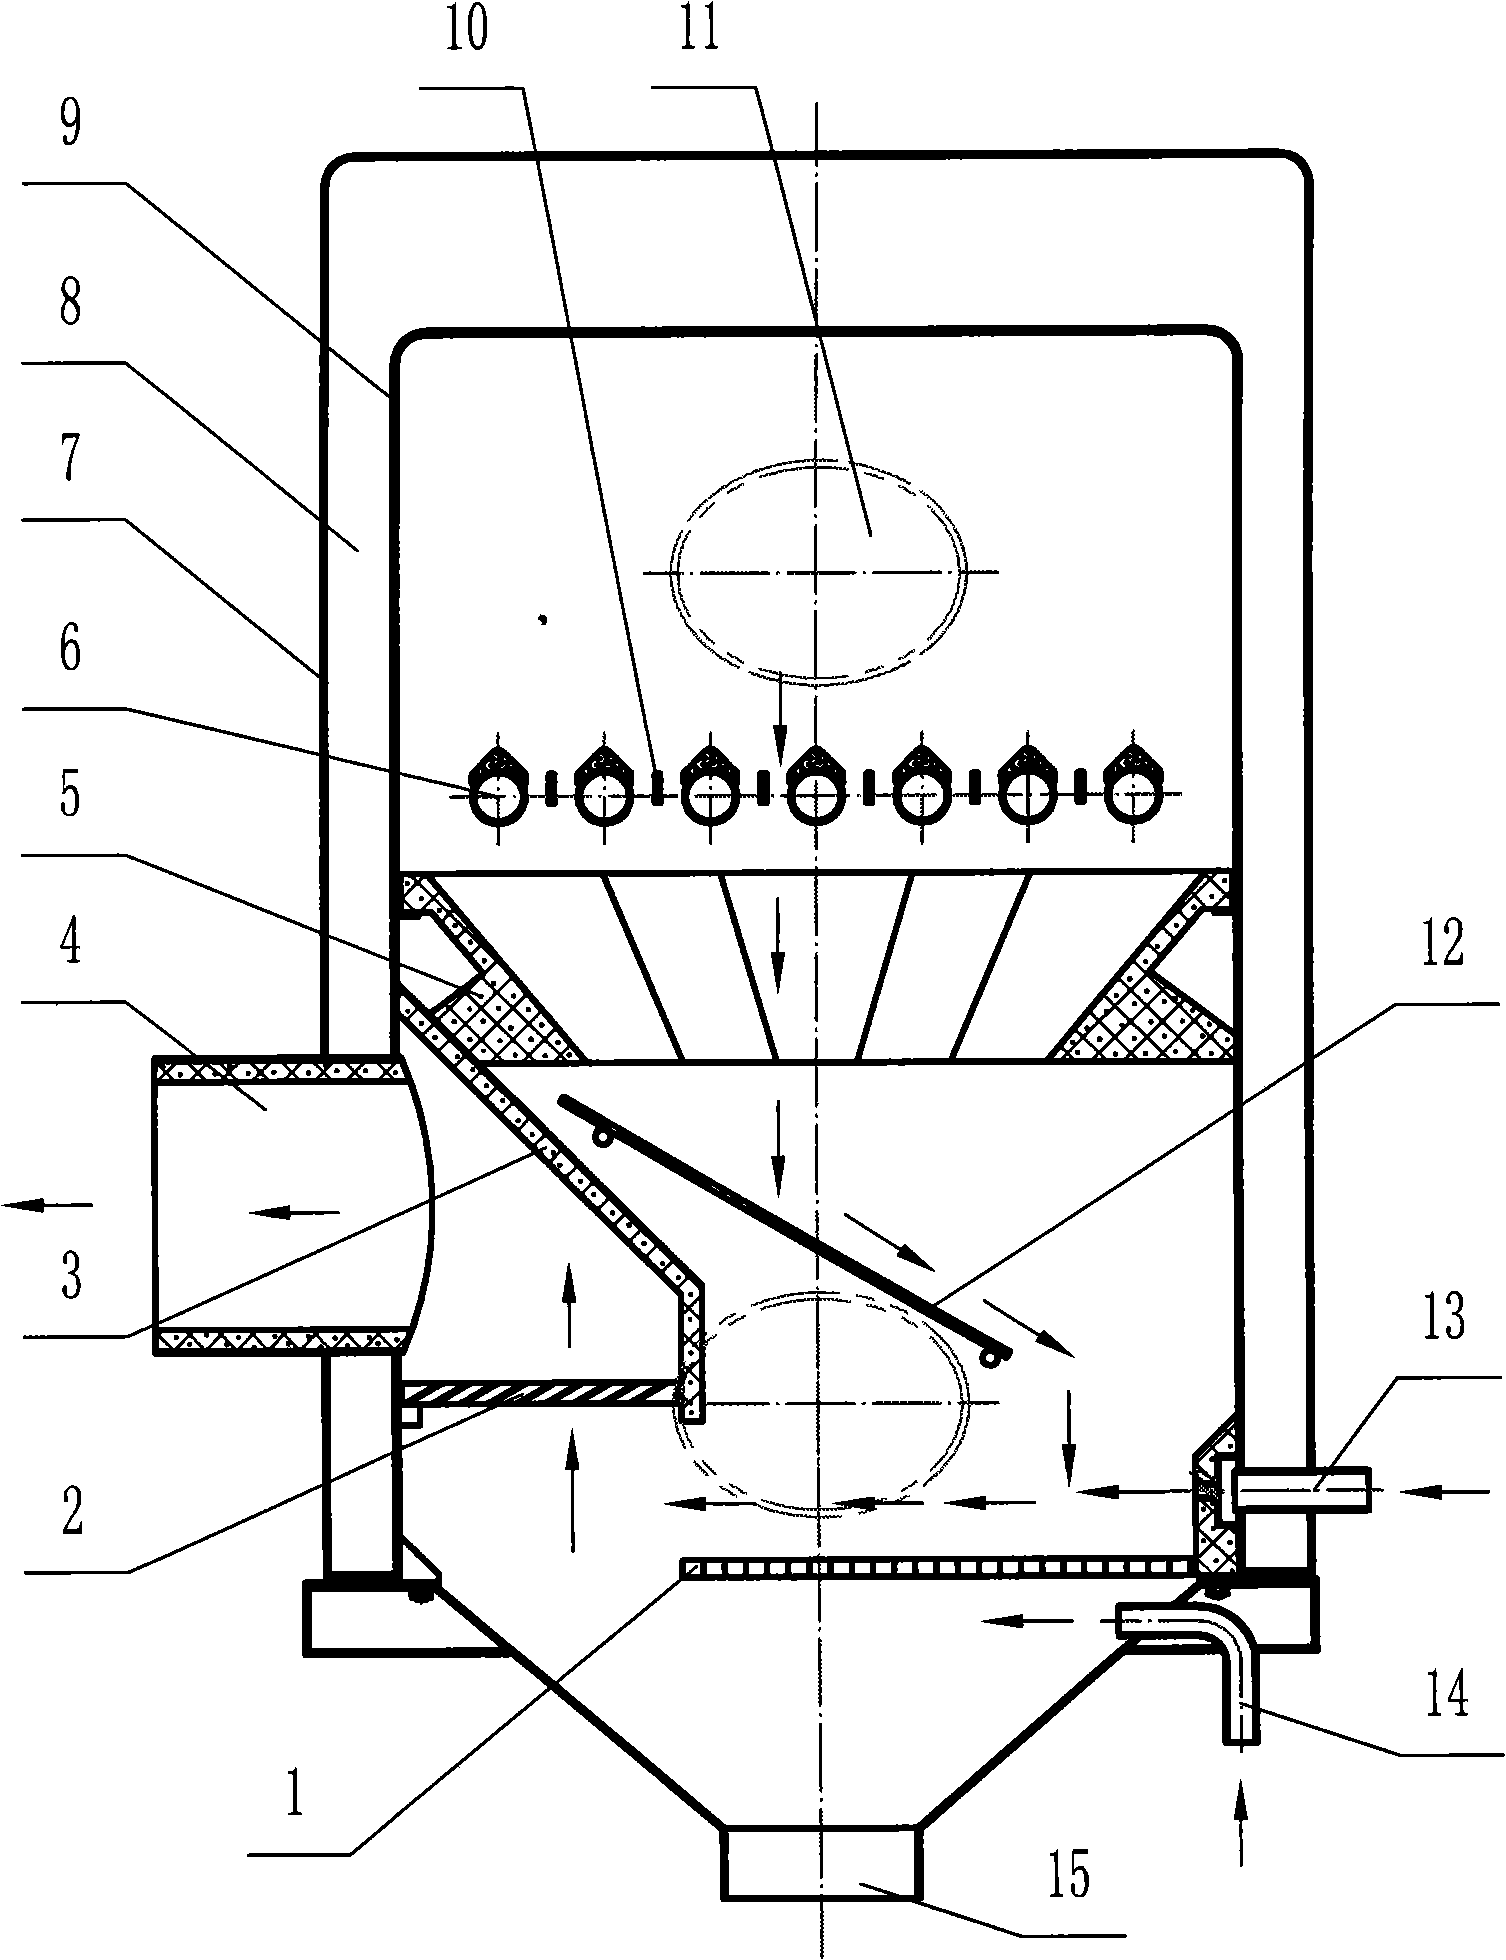 High-temperature combustion-supporting device and special combustion device for inverse combustion type biomass fuel